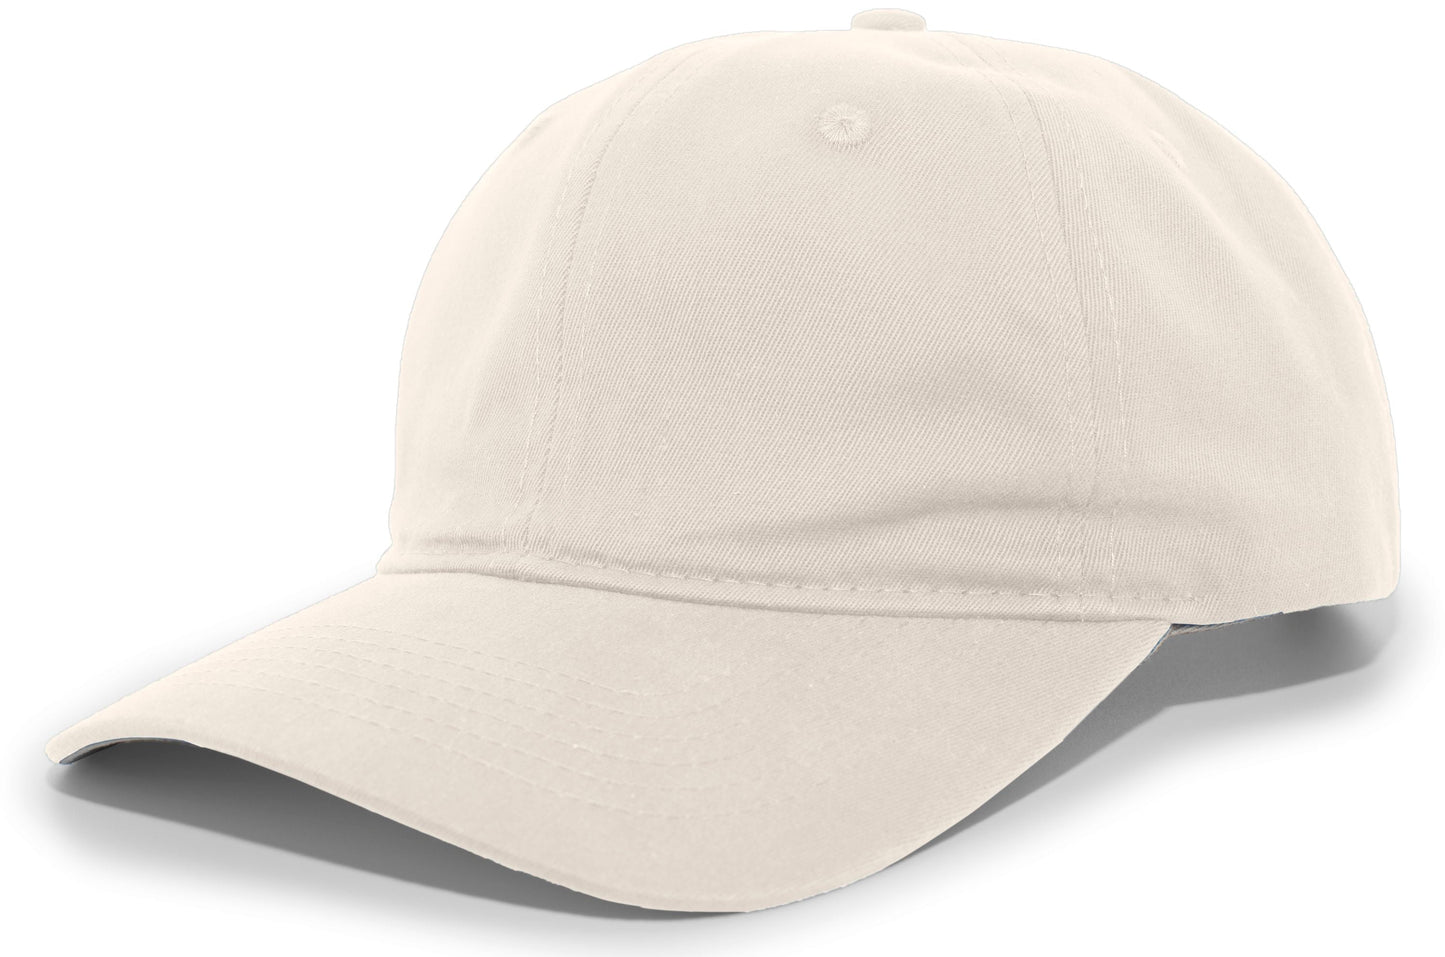 PACIFIC HEADWEAR - BRUSHED COTTON TWILL HOOK-AND-LOOP ADJUSTABLE CAP - 220C